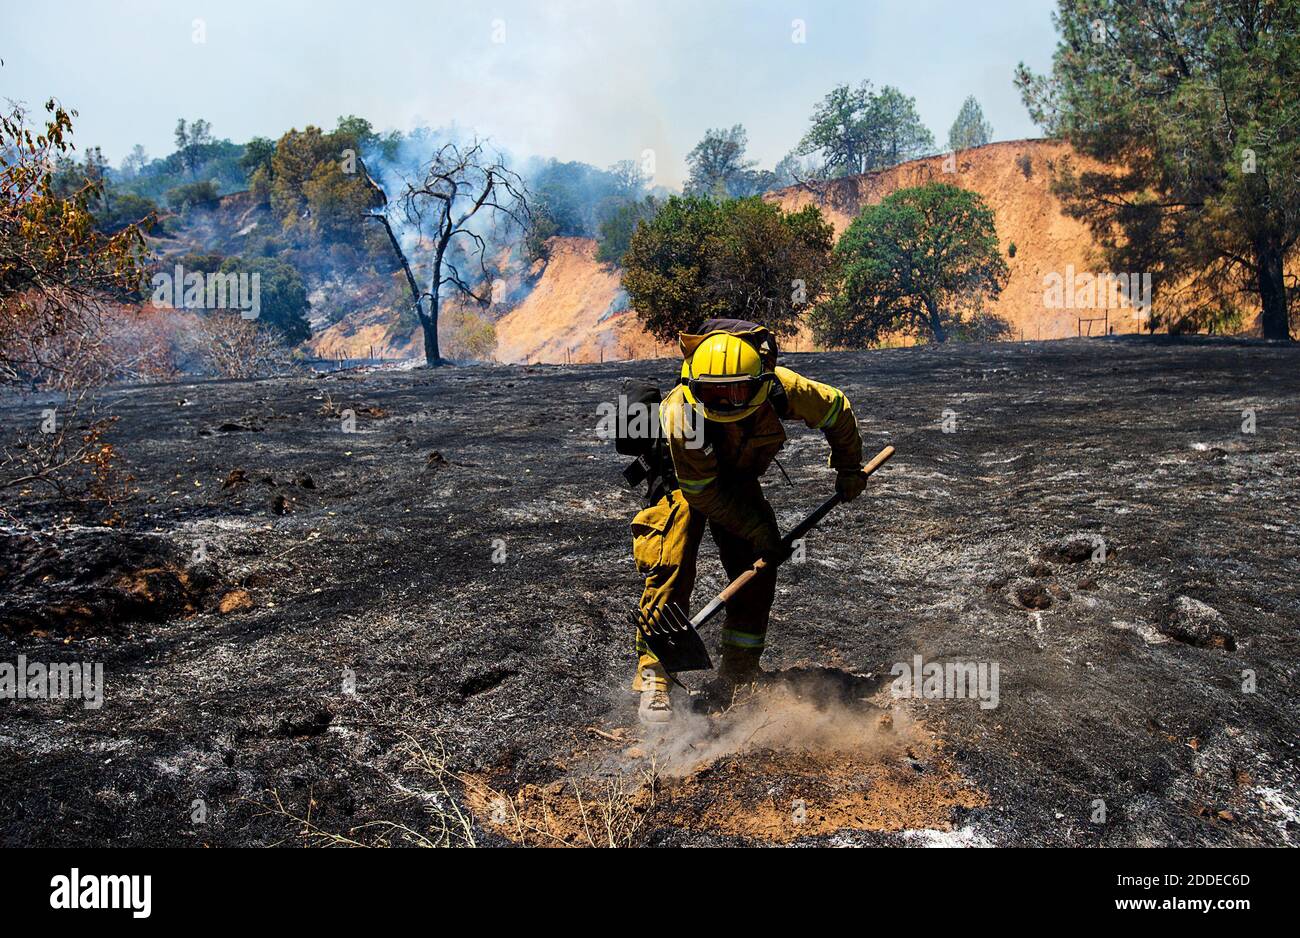 NO FILM, NO VIDEO, NO TV, NO DOCUMENTARY - Jack Miguel of the Keyes Fire Department attacks a hot spot during the County Fire, which has burned more than 22,000 acres without containment, on Sunday, July 1, 2018 in Capay Valley, CA, USA. Photo by Paul Kitagaki Jr./Sacramento Bee/TNS/ABACAPRESS.COM Stock Photo